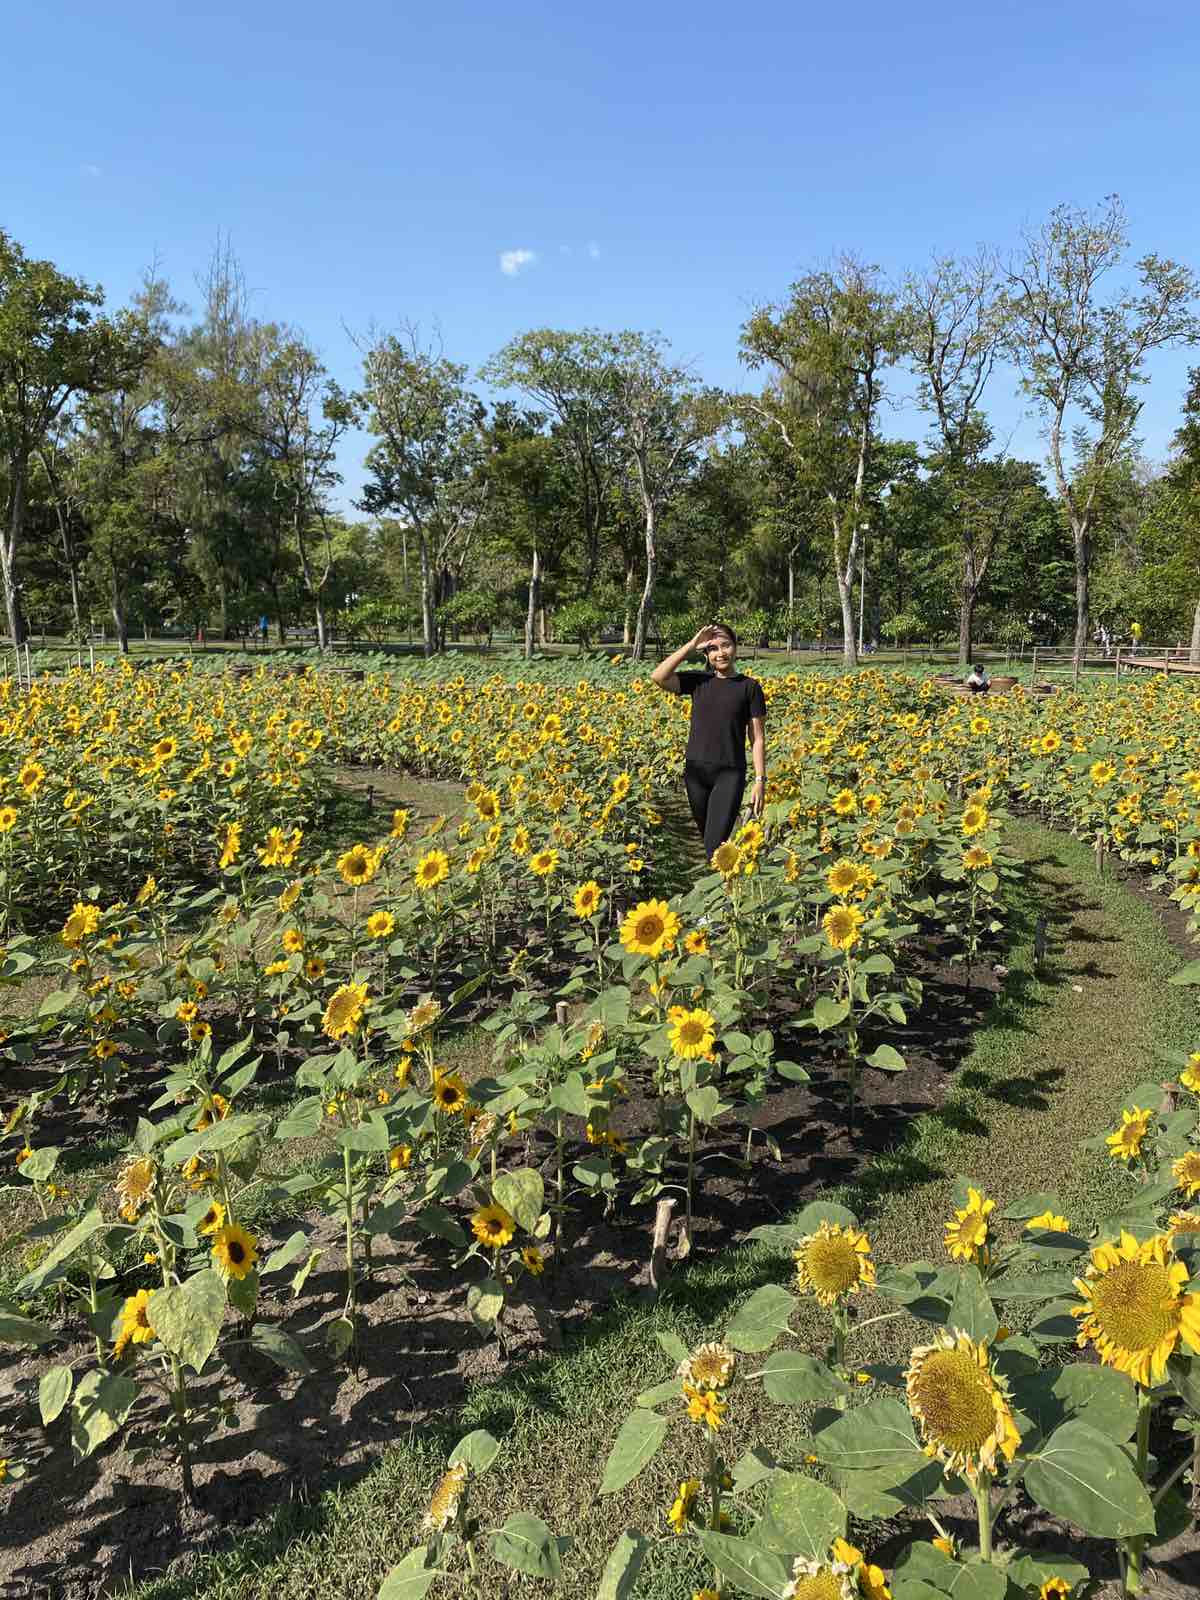 A woman shielding her face from the sun standing in the middle of a sunflower field